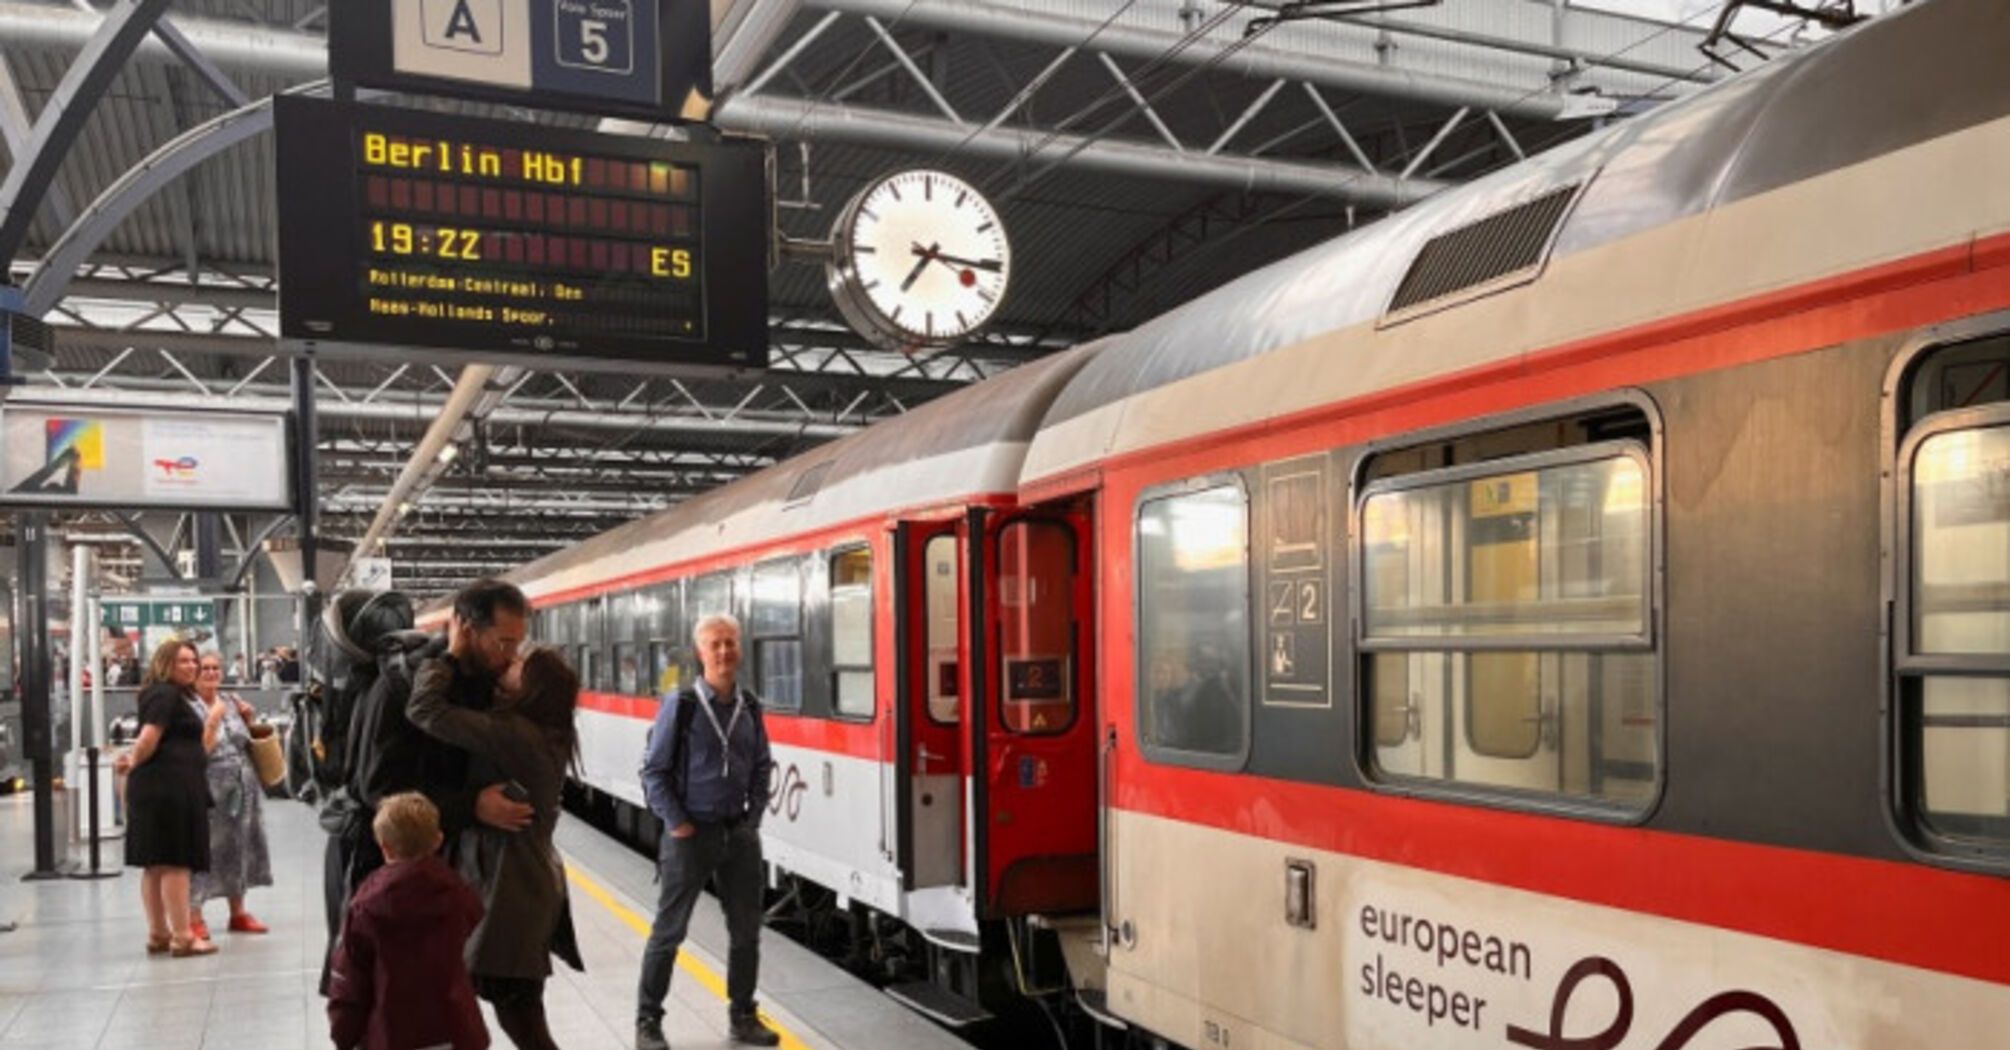 European Sleeper has launched a new night train